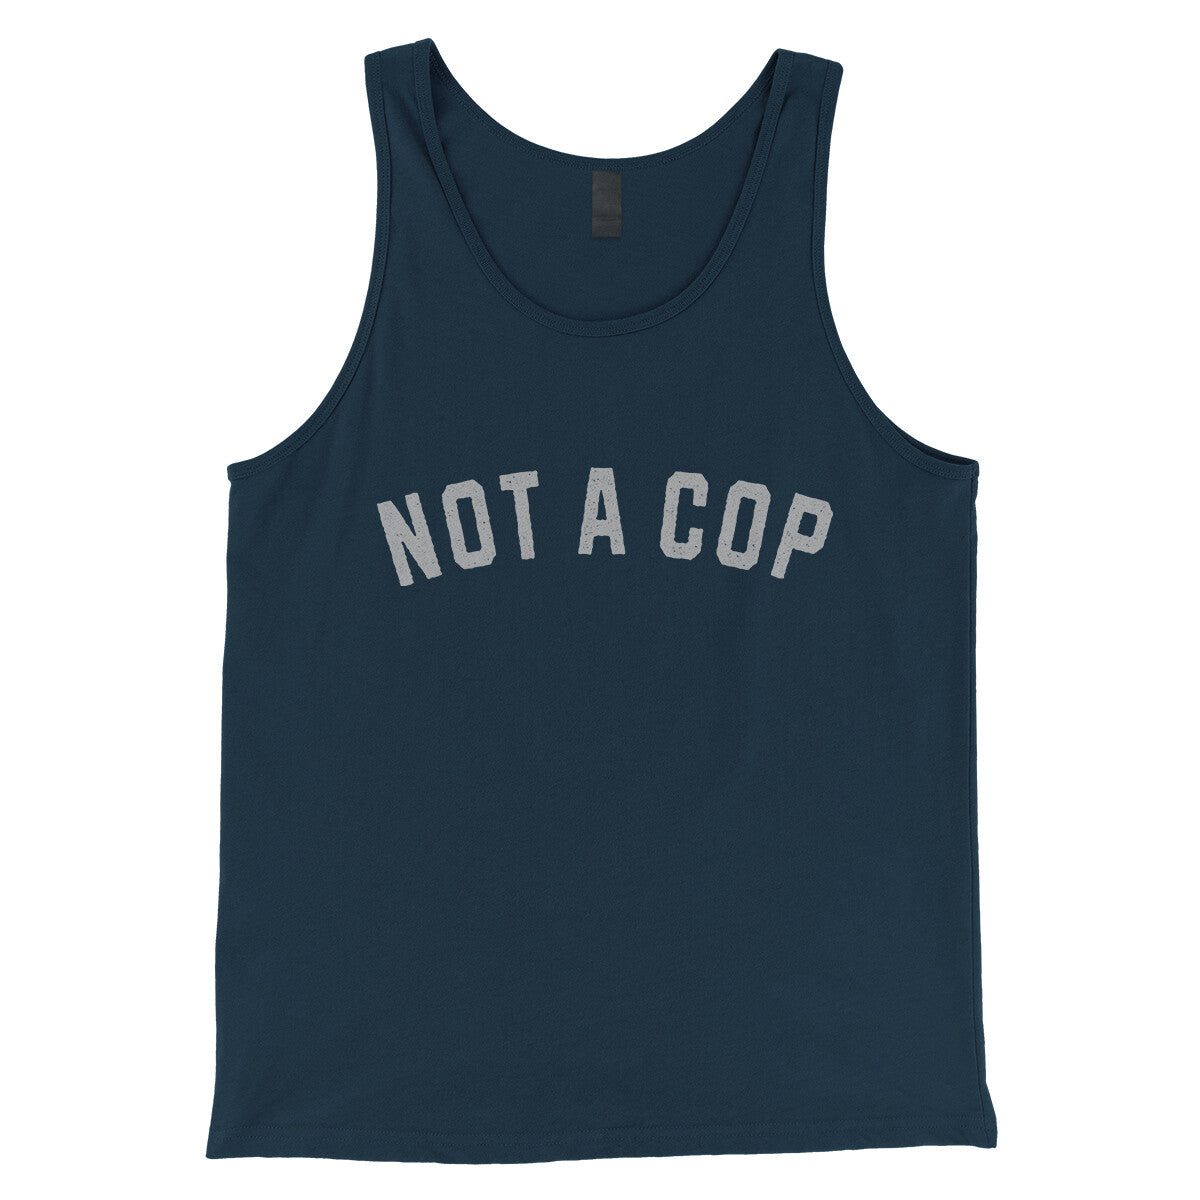 Not a Cop in Navy Color